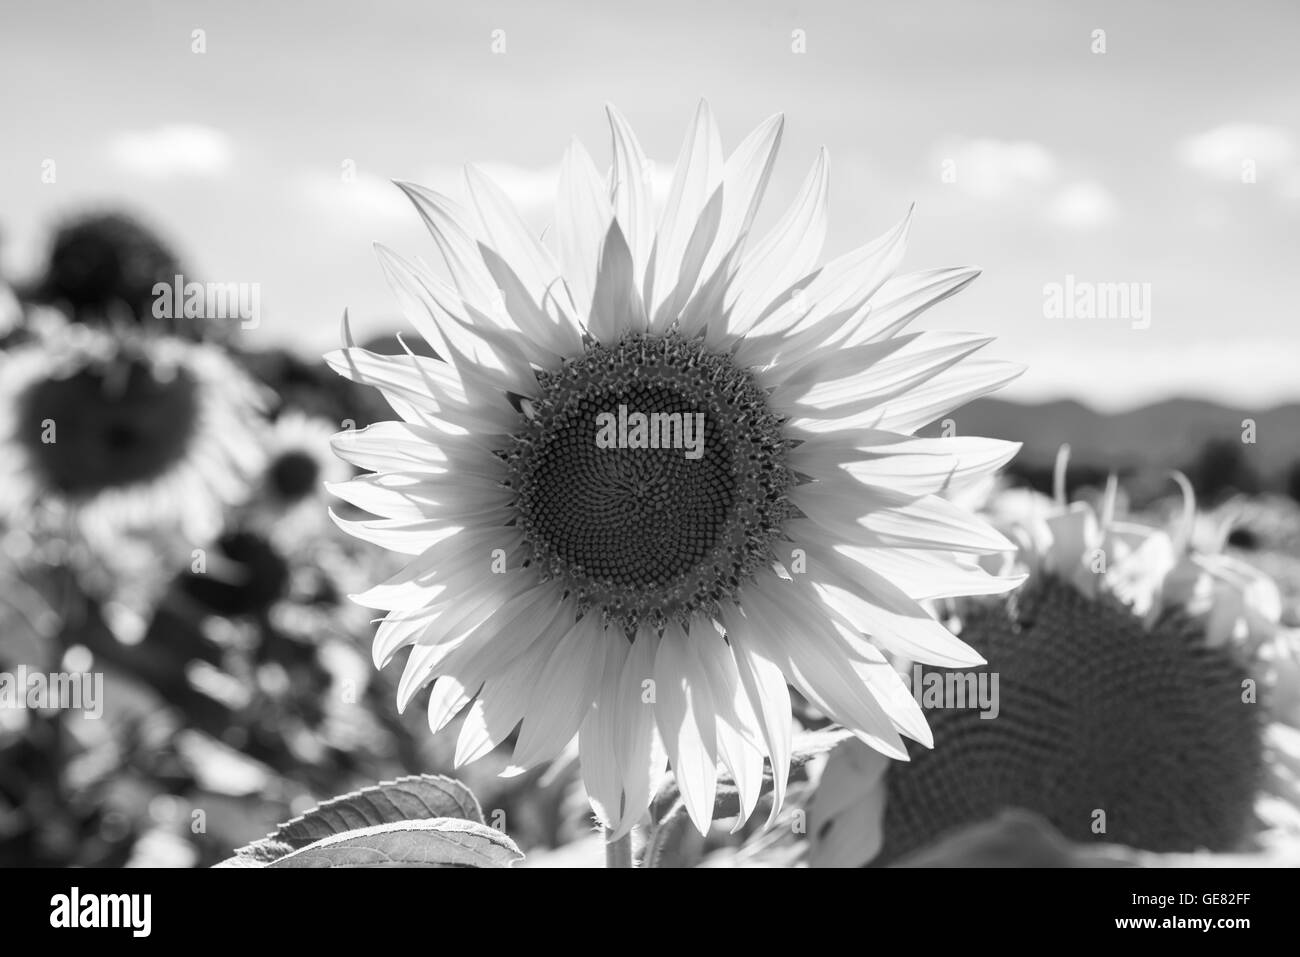 Sunflower field in summer black and white, Italy Umbria Stock Photo